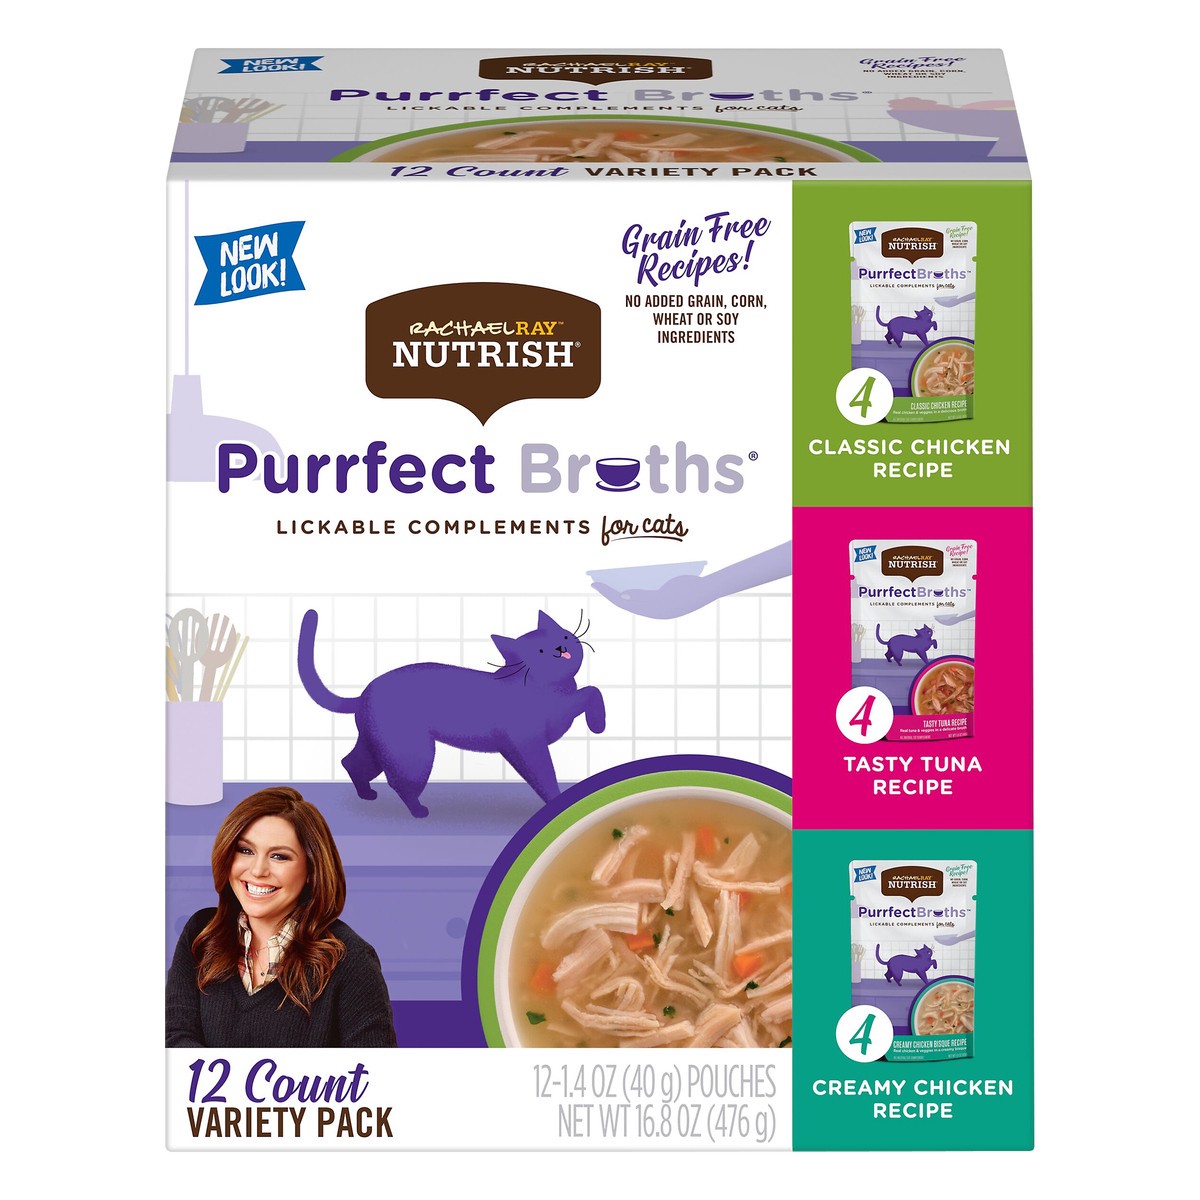 slide 1 of 8, Rachael Ray Nutrish Purrfect Broths Variety Pack, Lickable Complements for Cats, 1.4 oz. Pouch, 12 Count, 16.8 oz